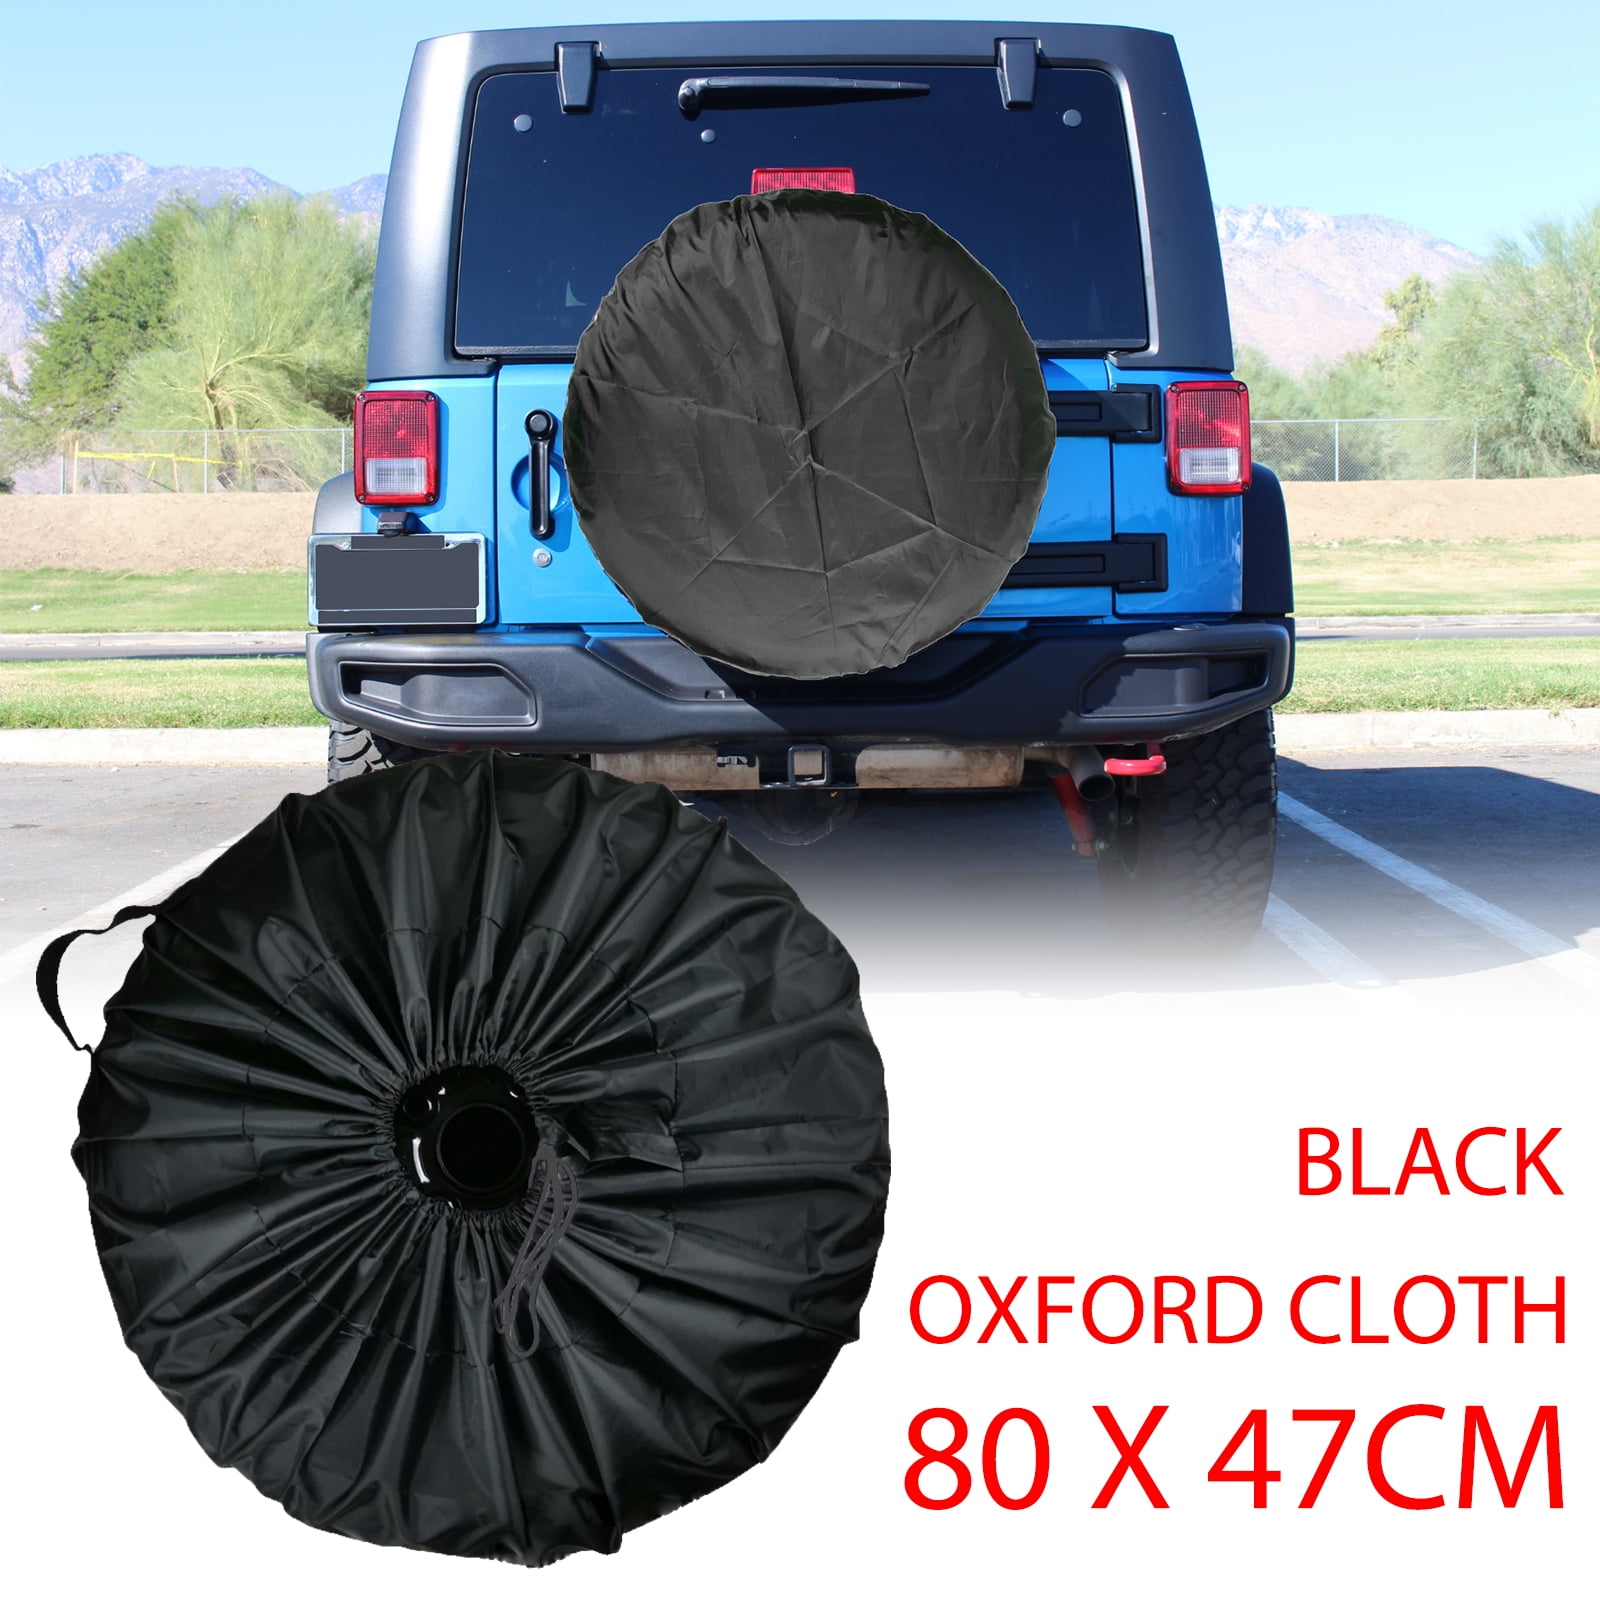 Spare Tire Covers Lake Forest Print Waterproof Dust-Proof Universal Wheel Tire Protectors Fits Tire for Jeep Trailer Rv SUV and Many Vehicle